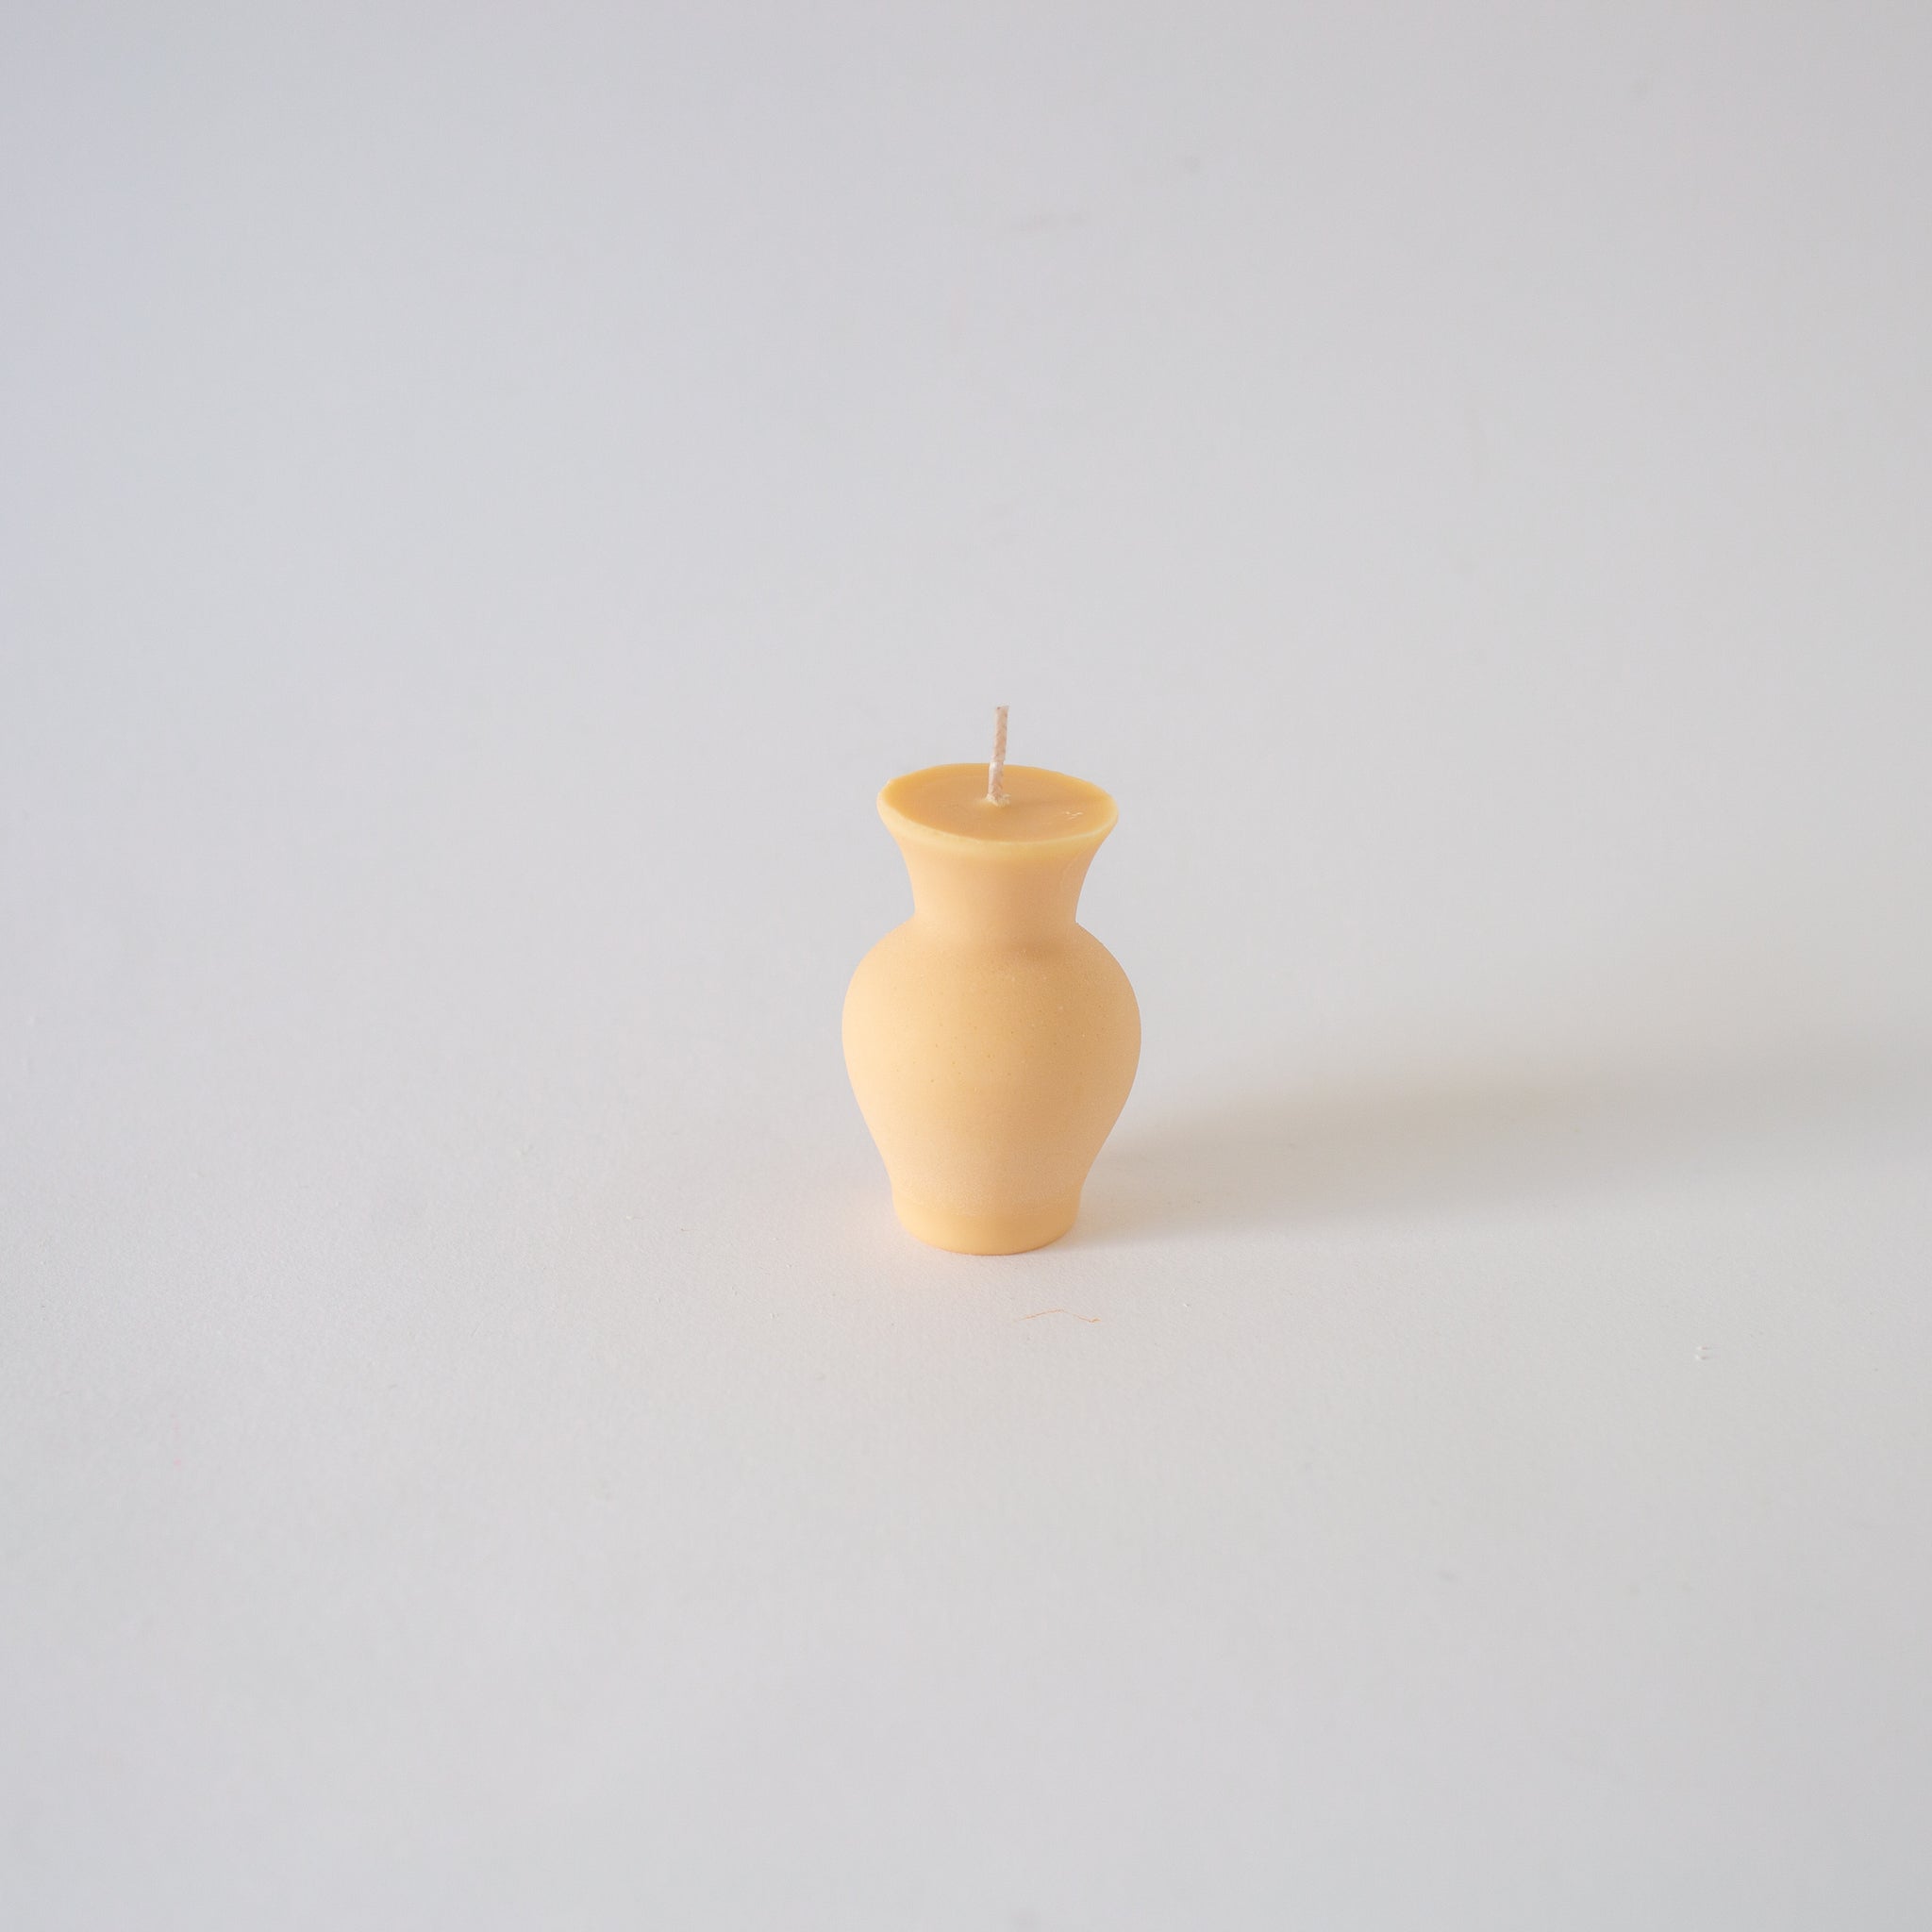 Nata Concept Iris soy Candle in Peach. Available at EASE Toronto. 